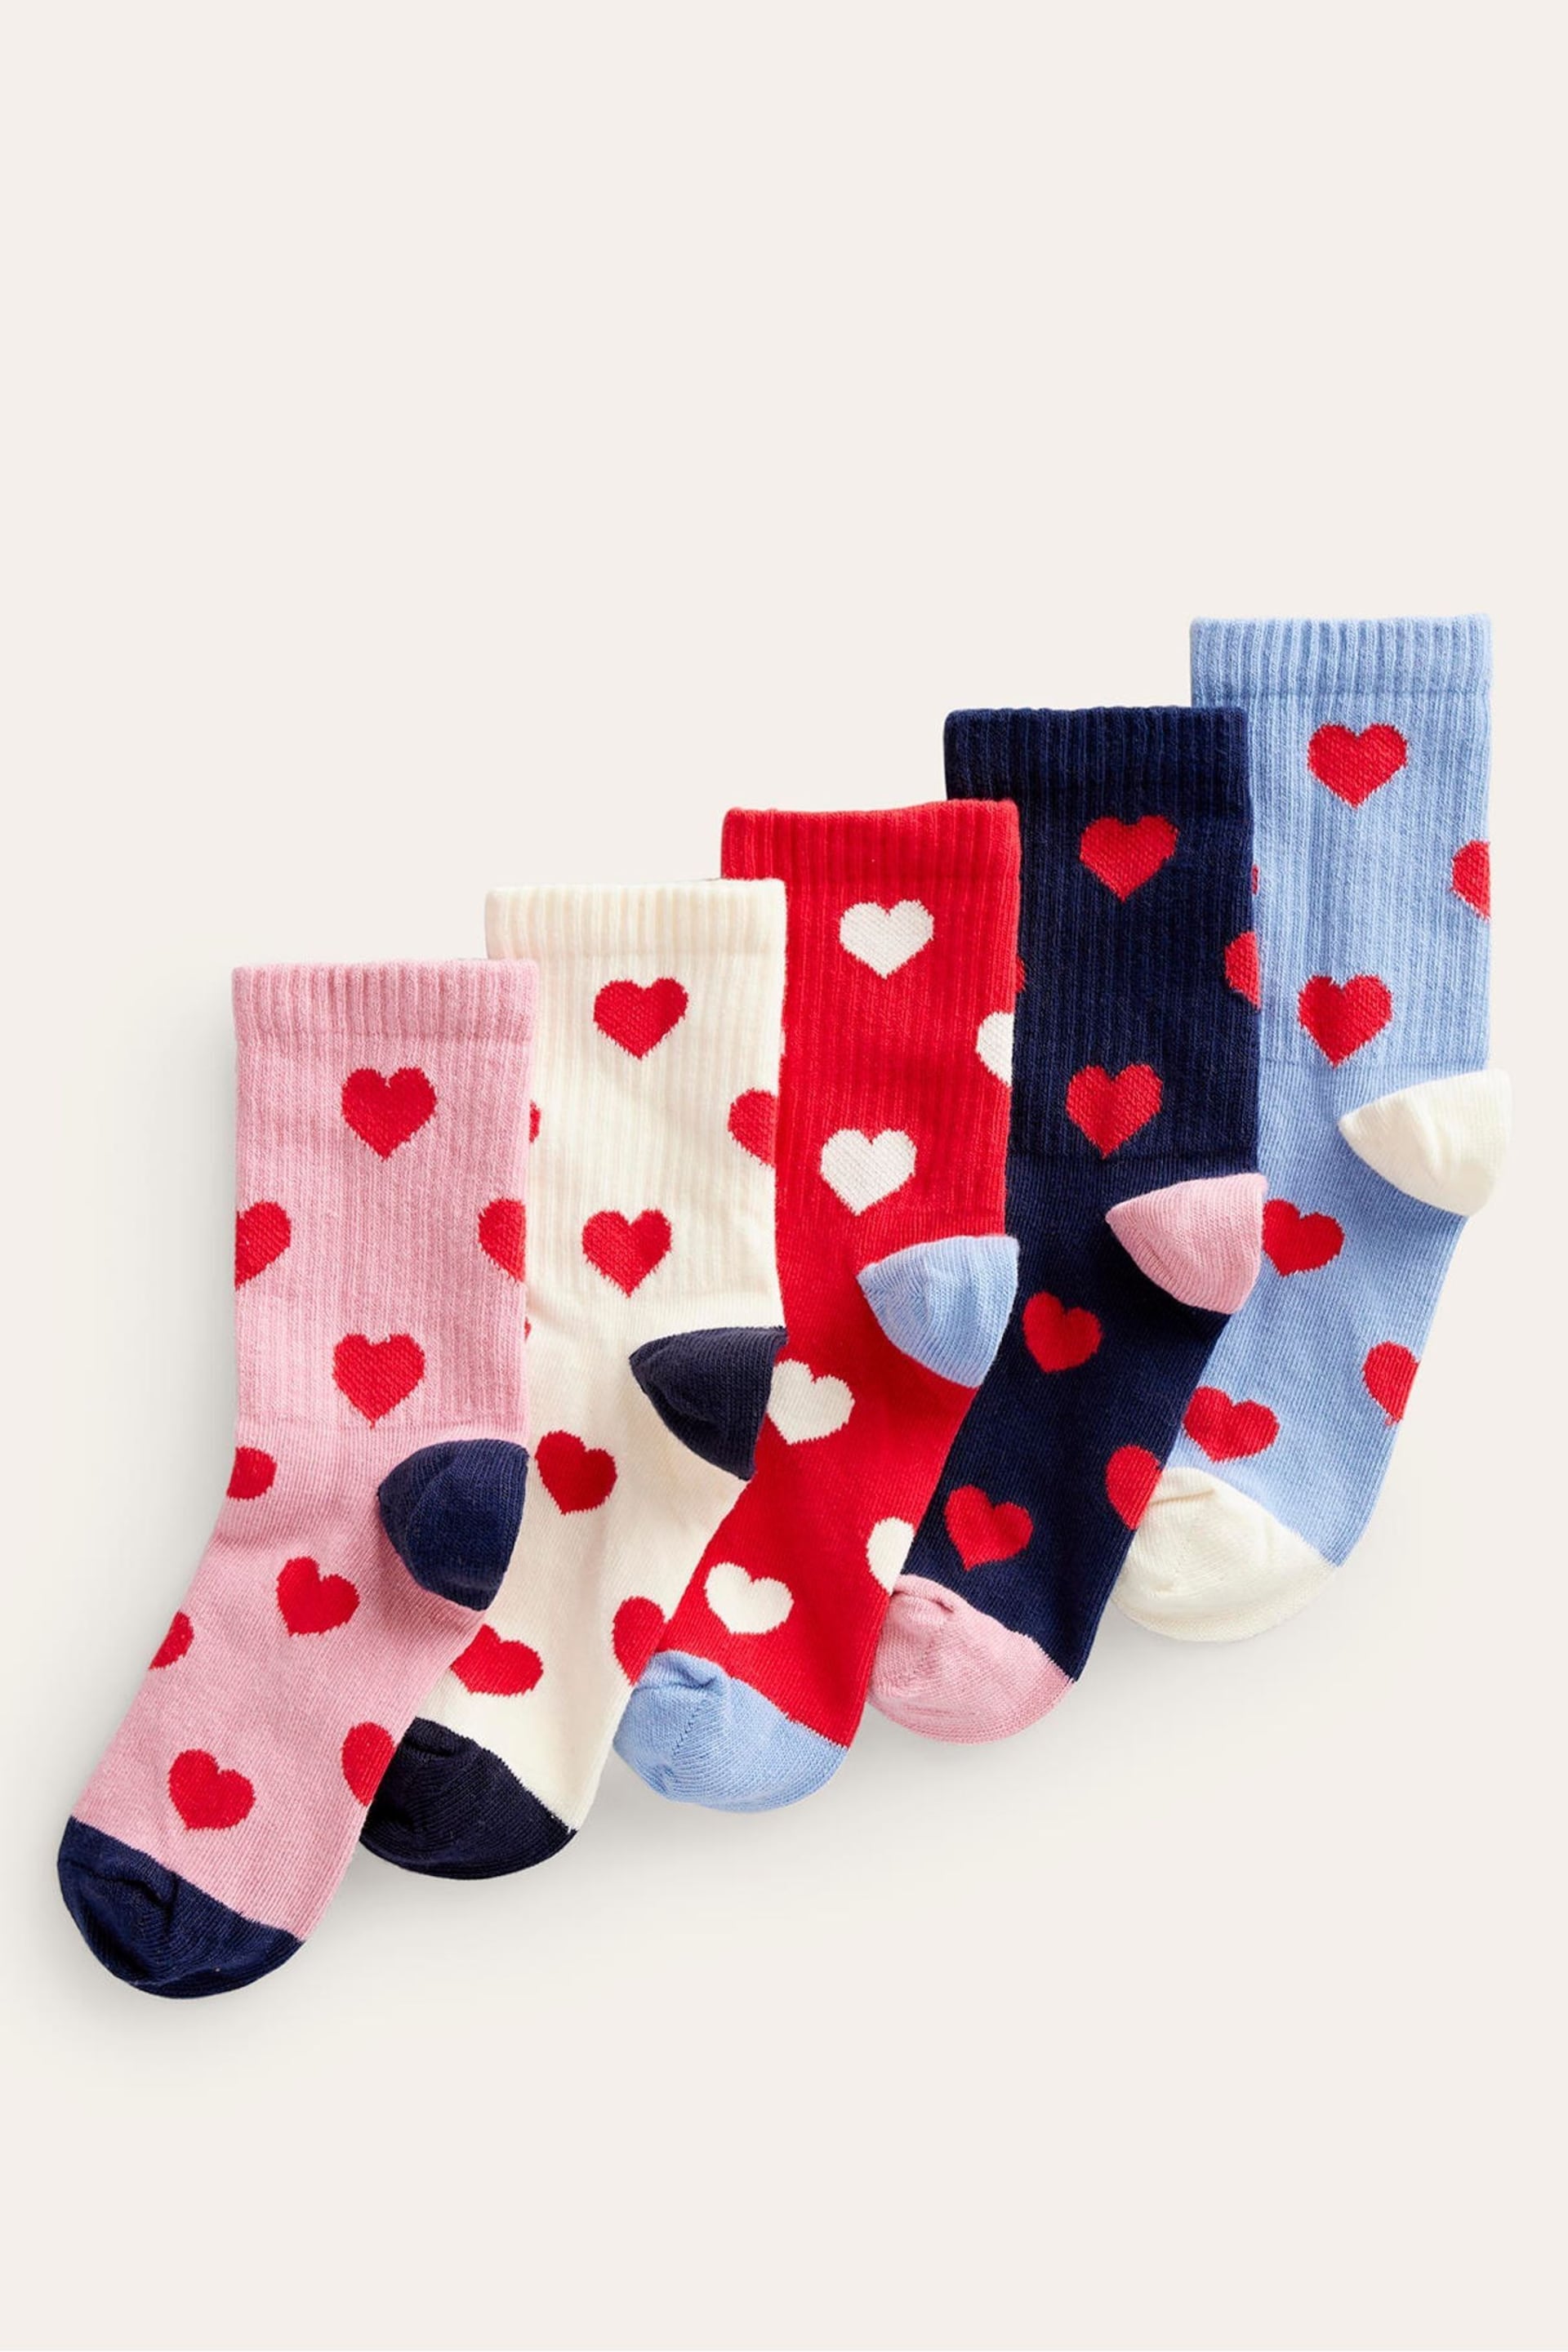 Boden Red Ribbed Socks 5 Pack - Image 1 of 1